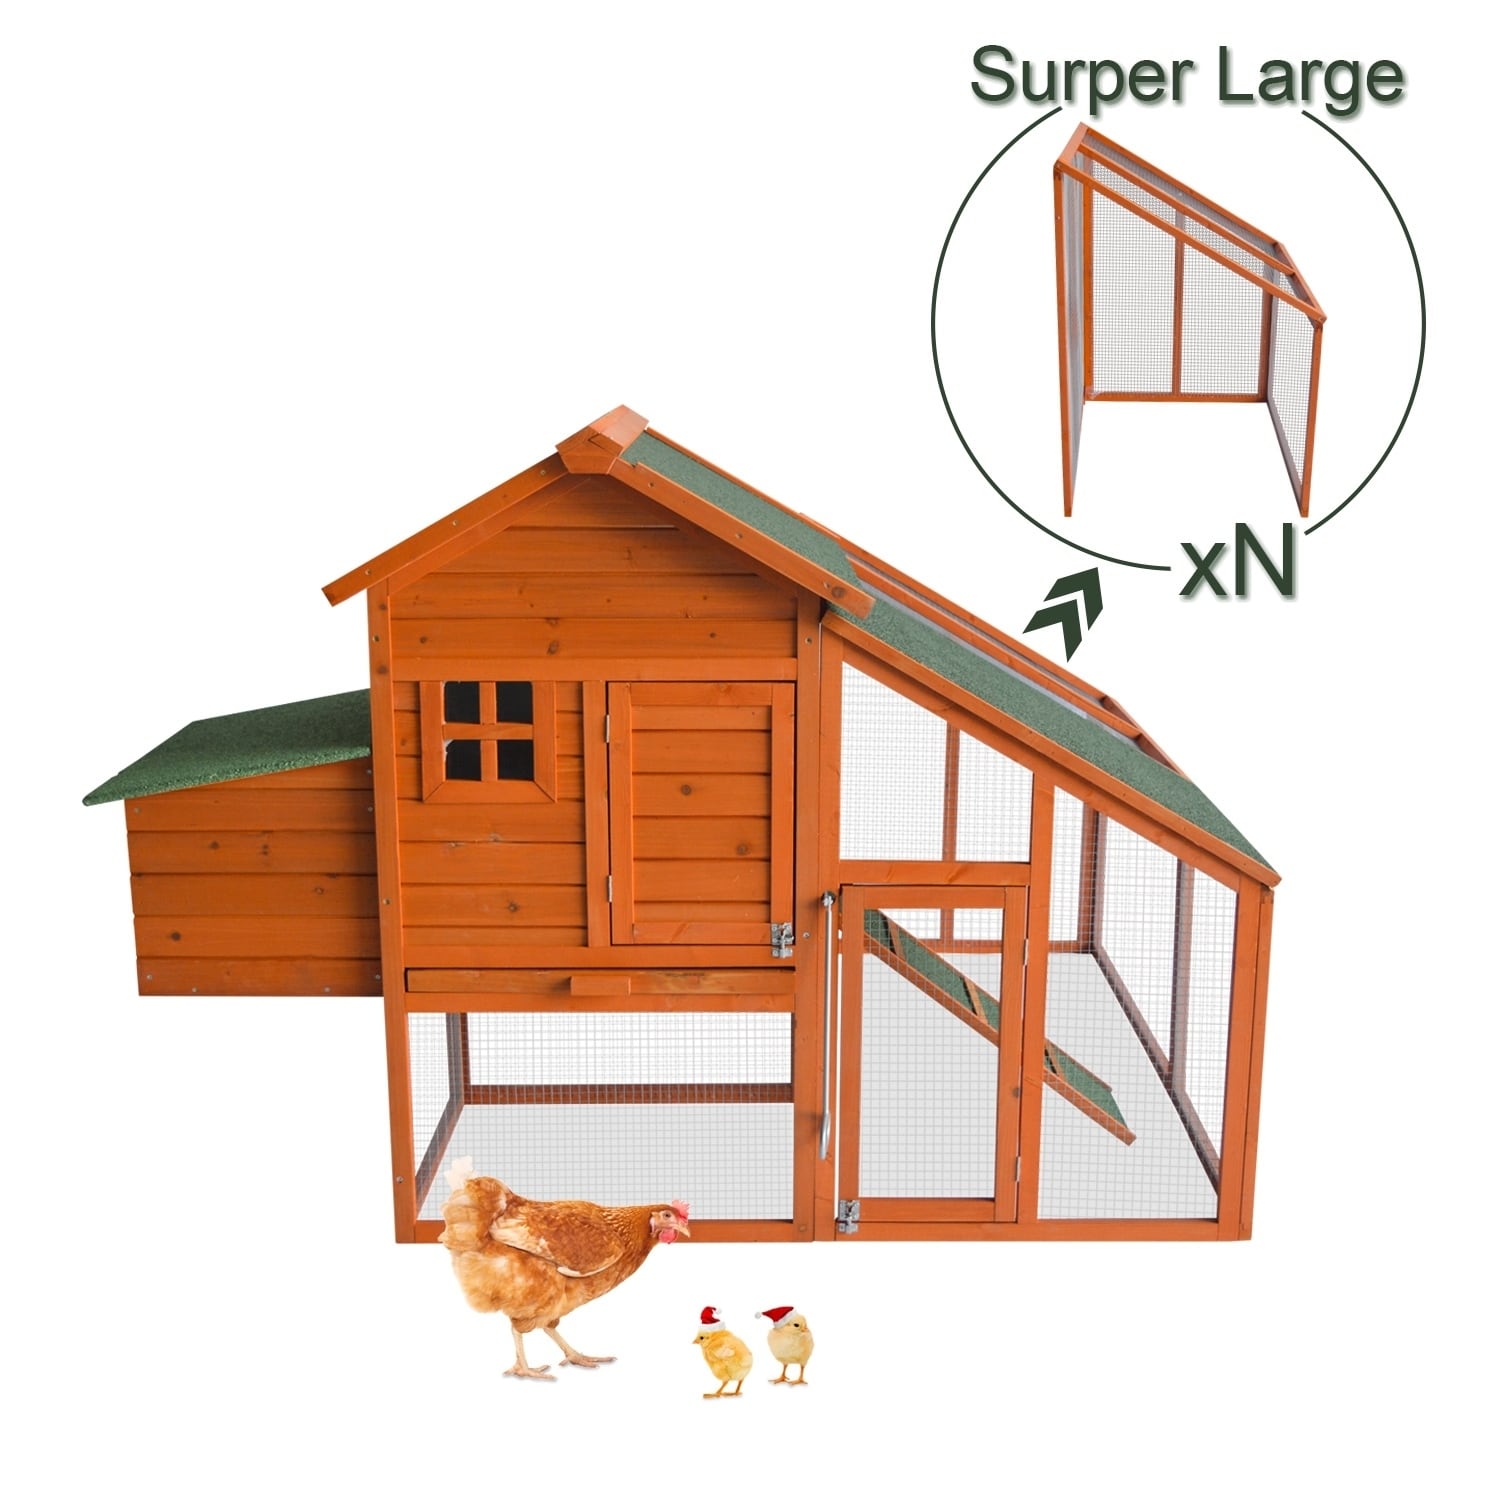 Shop Kinpaw Large Chicken Coop Wooden Hen House Customizable Poultry Cage For Small Animals Bunny Hutch W Outdoor Runs Overstock 30427625,Small Living Room Furniture Arrangement Examples